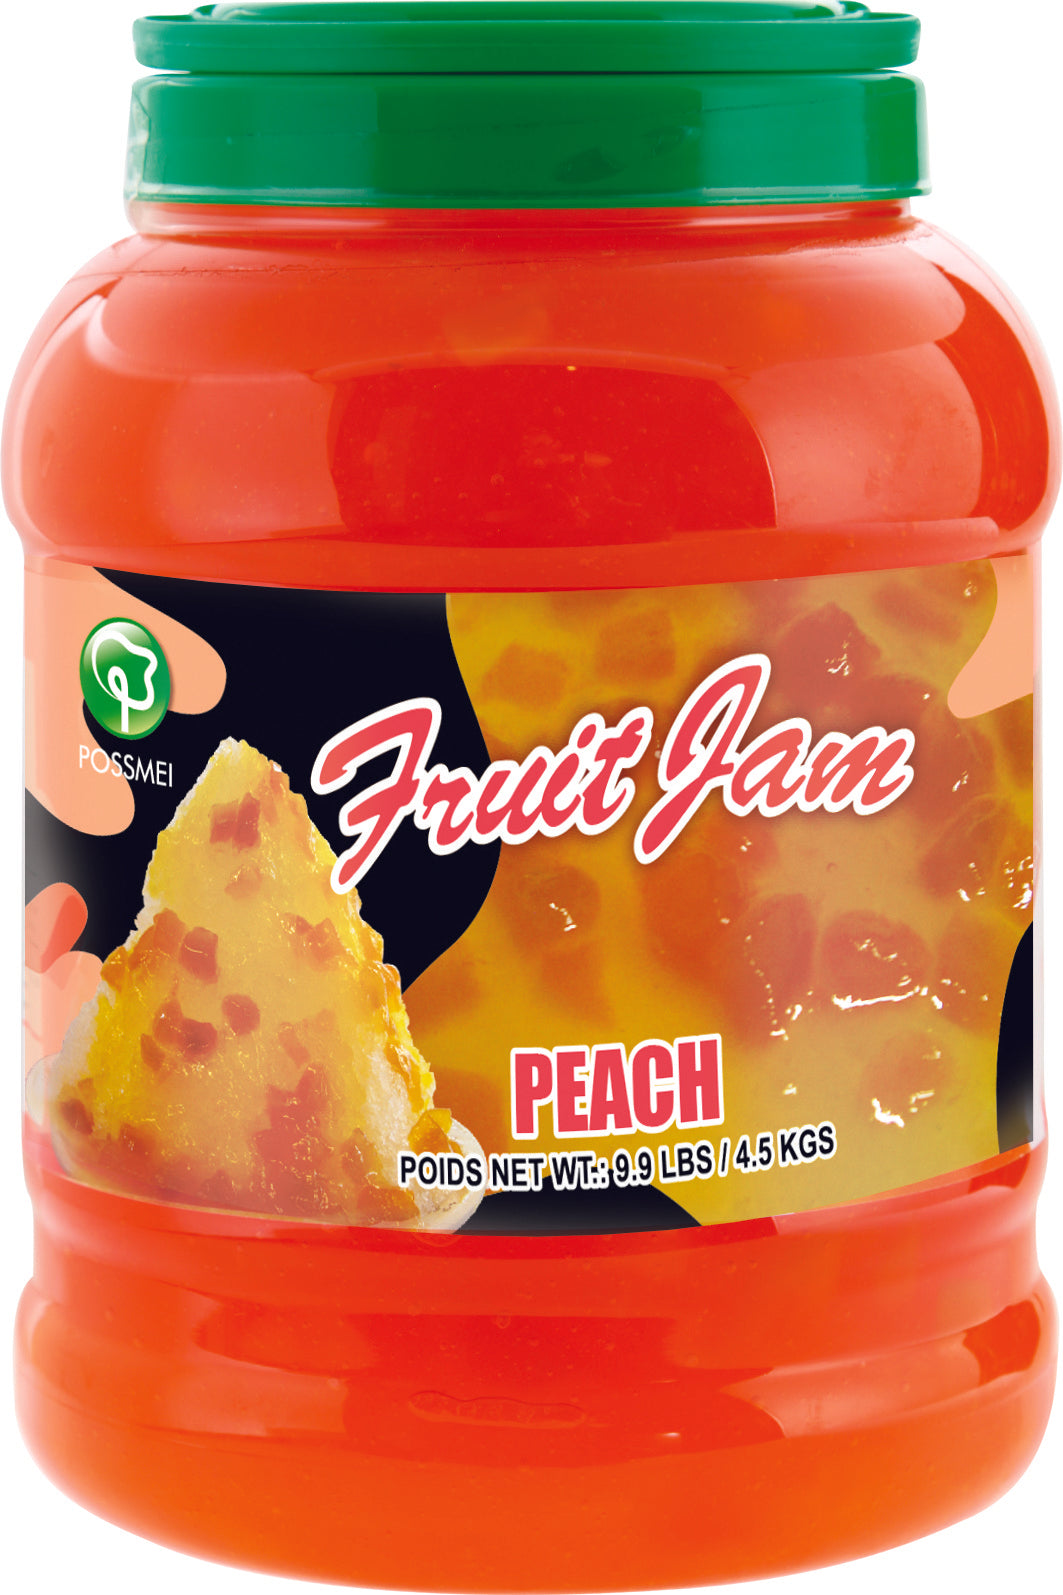 Possmei Peach Concentrated Jam